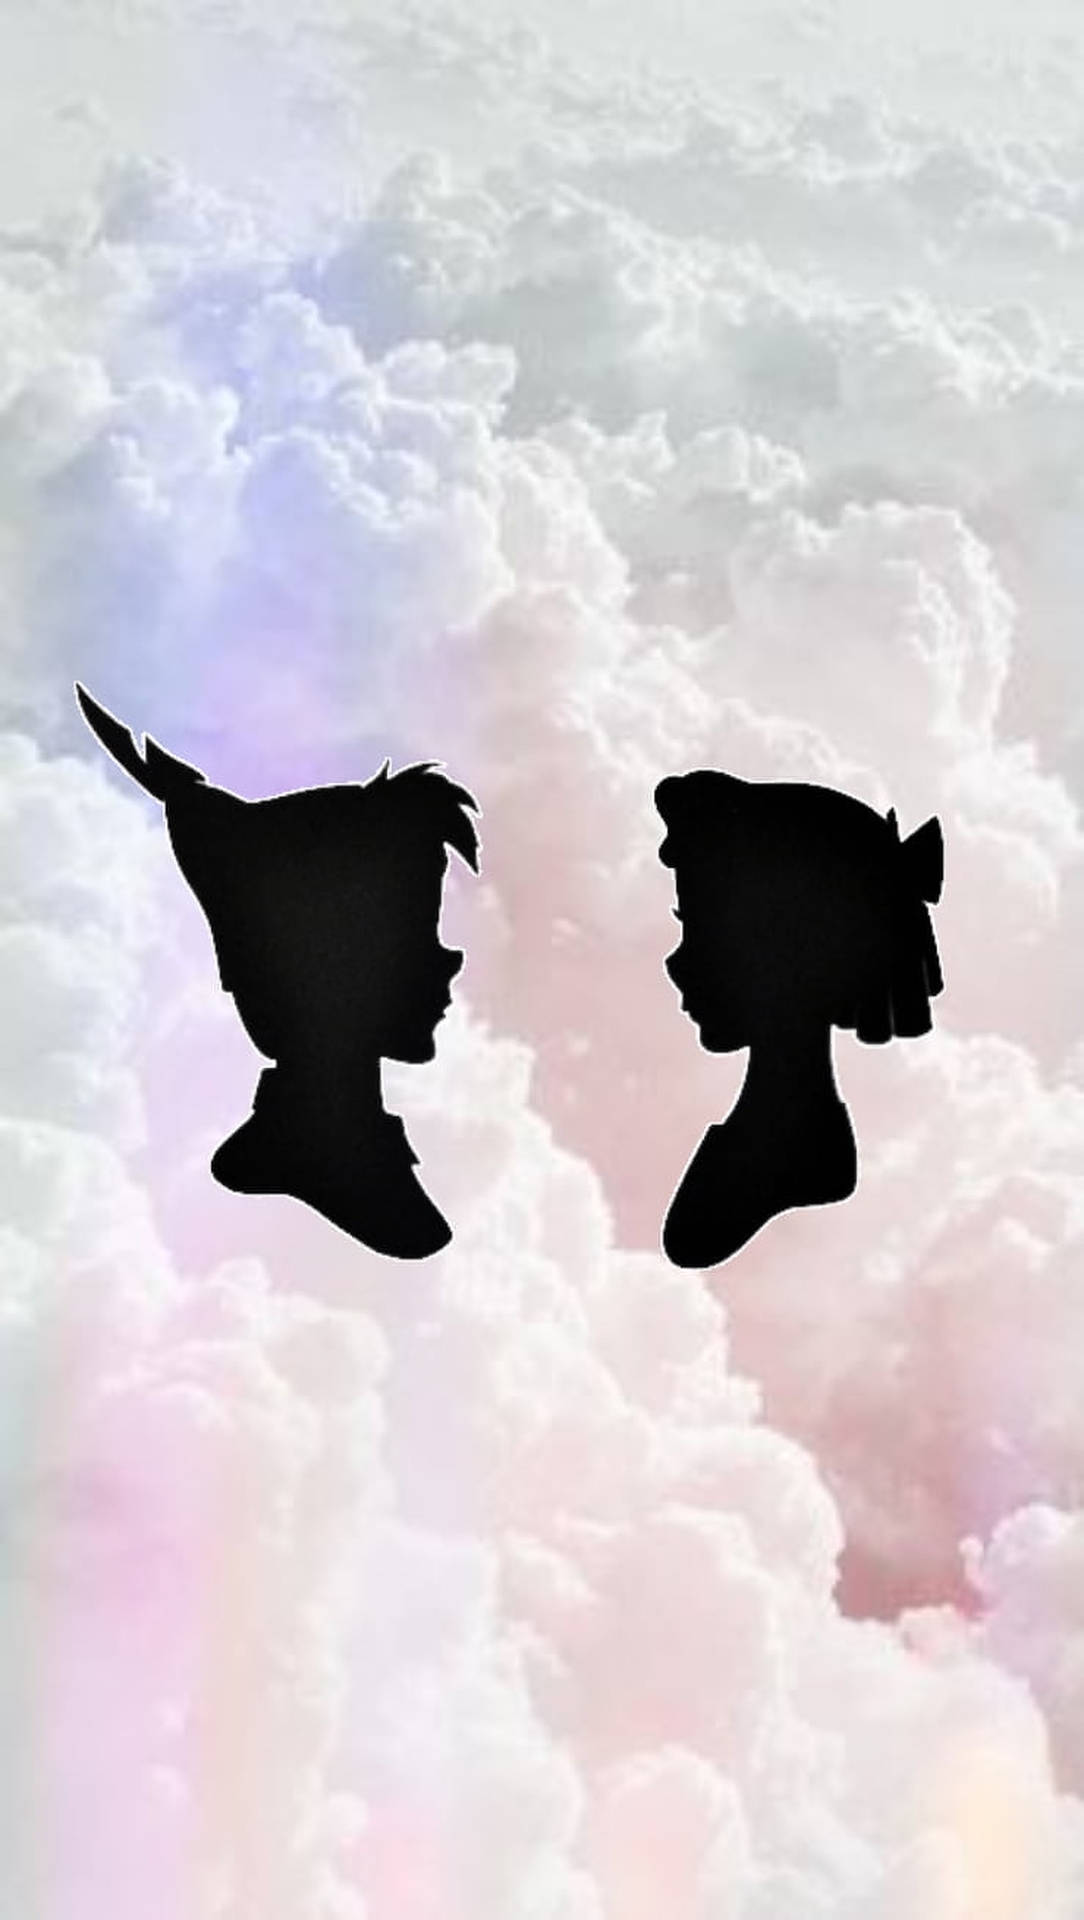 Peter Pan And Wendy Silhouette